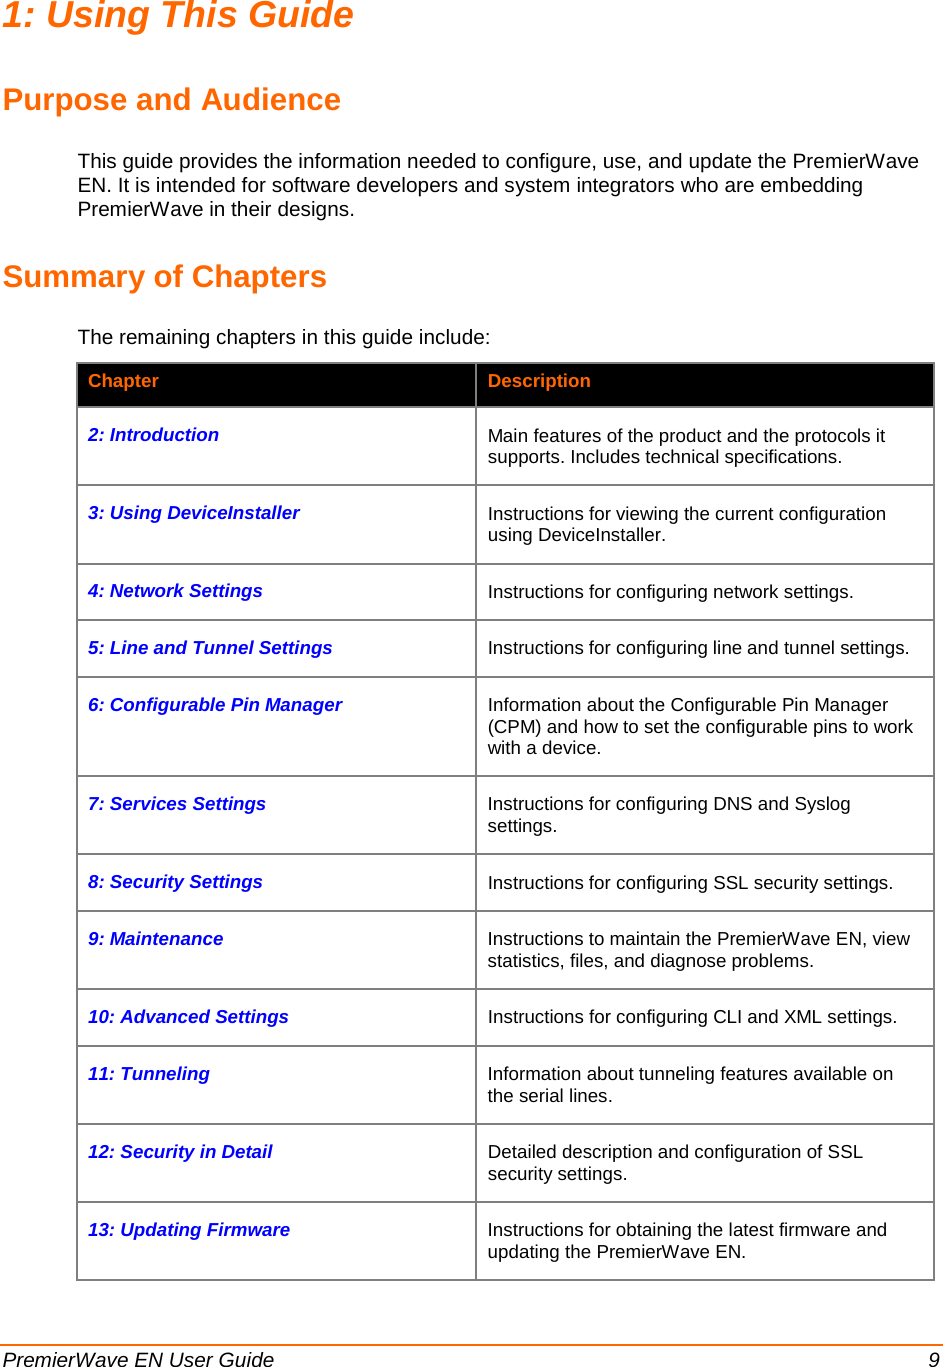  PremierWave EN User Guide    9 1: Using This Guide Purpose and Audience This guide provides the information needed to configure, use, and update the PremierWave EN. It is intended for software developers and system integrators who are embedding PremierWave in their designs.  Summary of Chapters The remaining chapters in this guide include: Chapter  Description 2: Introduction Main features of the product and the protocols it supports. Includes technical specifications.  3: Using DeviceInstaller Instructions for viewing the current configuration using DeviceInstaller. 4: Network Settings Instructions for configuring network settings. 5: Line and Tunnel Settings Instructions for configuring line and tunnel settings. 6: Configurable Pin Manager Information about the Configurable Pin Manager (CPM) and how to set the configurable pins to work with a device. 7: Services Settings Instructions for configuring DNS and Syslog settings. 8: Security Settings Instructions for configuring SSL security settings.  9: Maintenance  Instructions to maintain the PremierWave EN, view statistics, files, and diagnose problems. 10: Advanced Settings   Instructions for configuring CLI and XML settings. 11: Tunneling Information about tunneling features available on the serial lines. 12: Security in Detail Detailed description and configuration of SSL security settings. 13: Updating Firmware Instructions for obtaining the latest firmware and updating the PremierWave EN. 